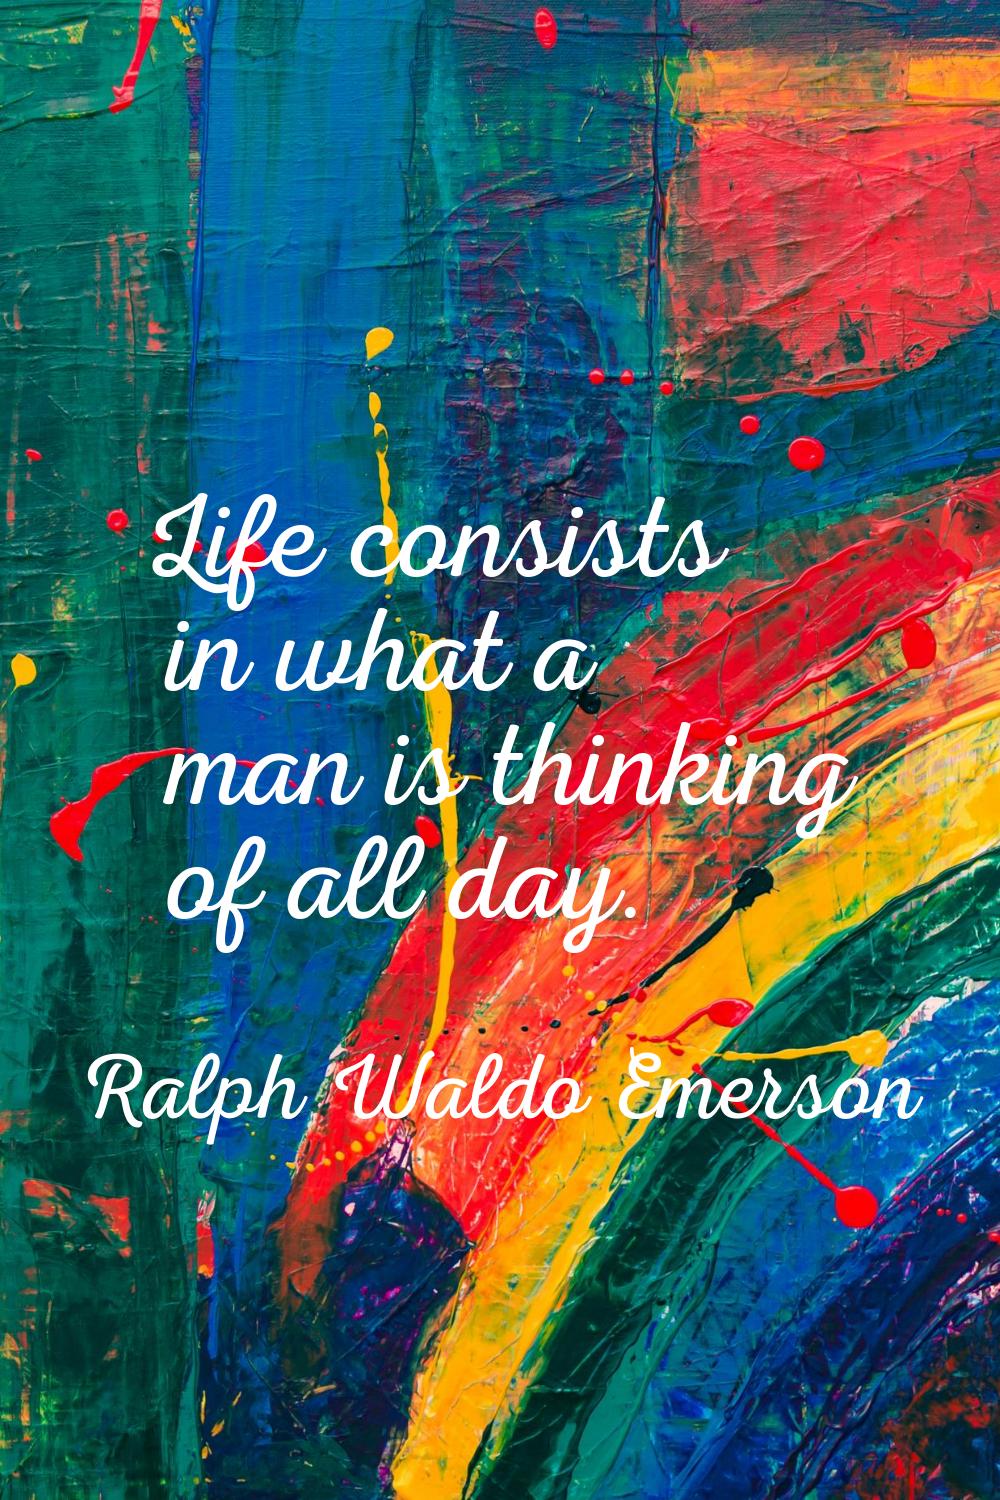 Life consists in what a man is thinking of all day.